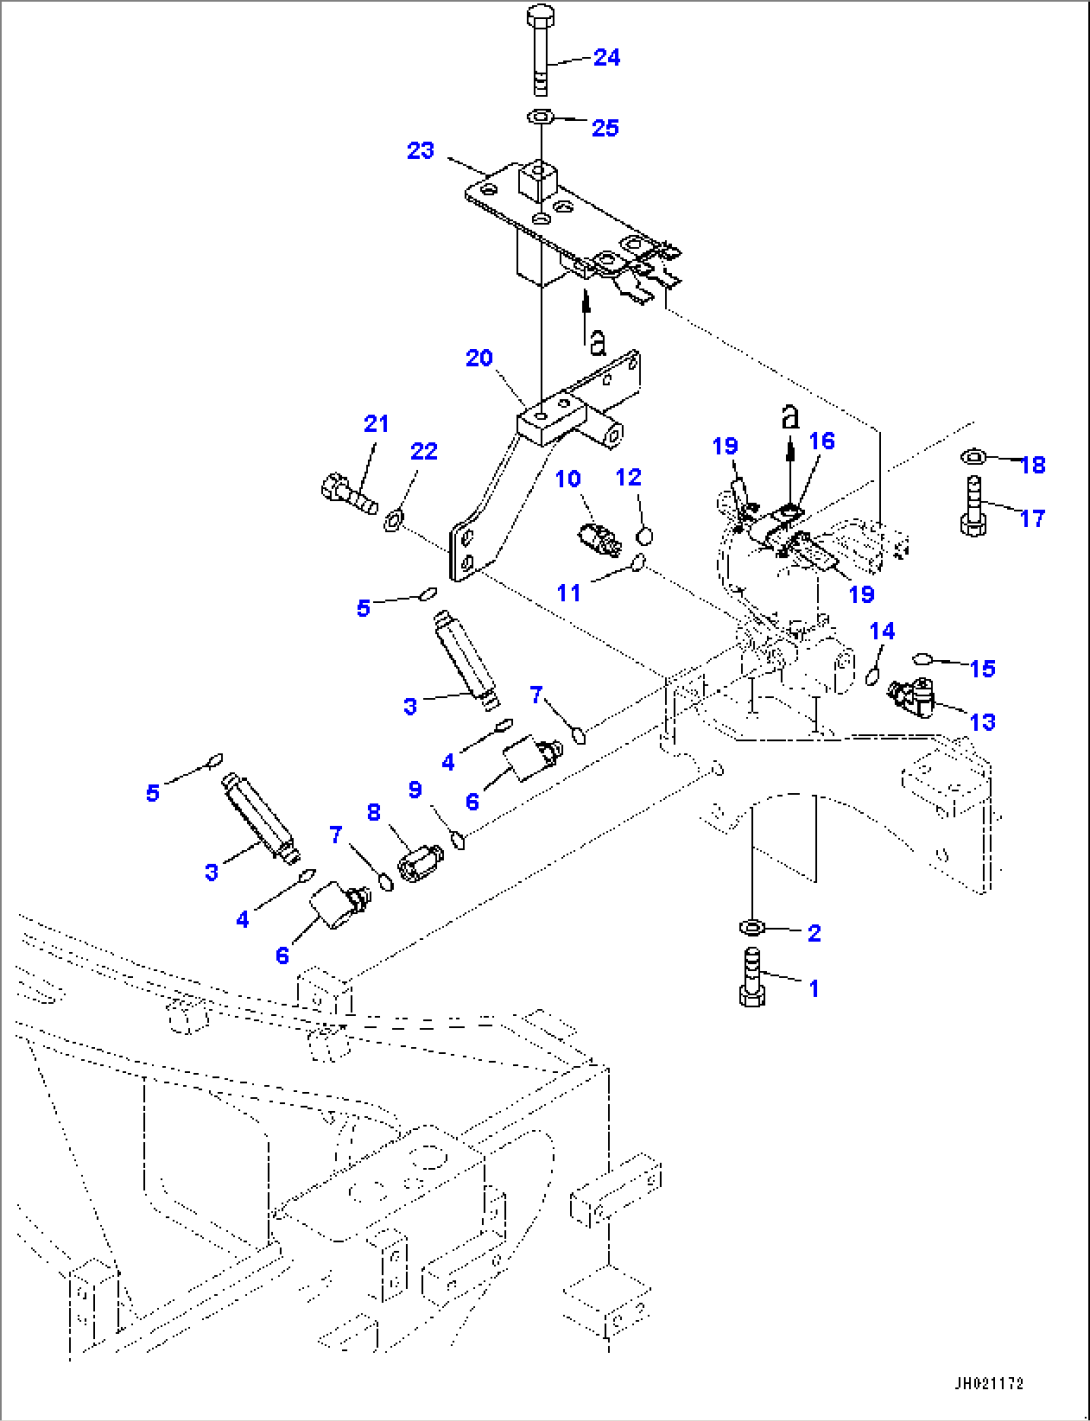 Pipelayer Frame, Solenoid Valve Related Parts (#15479-)